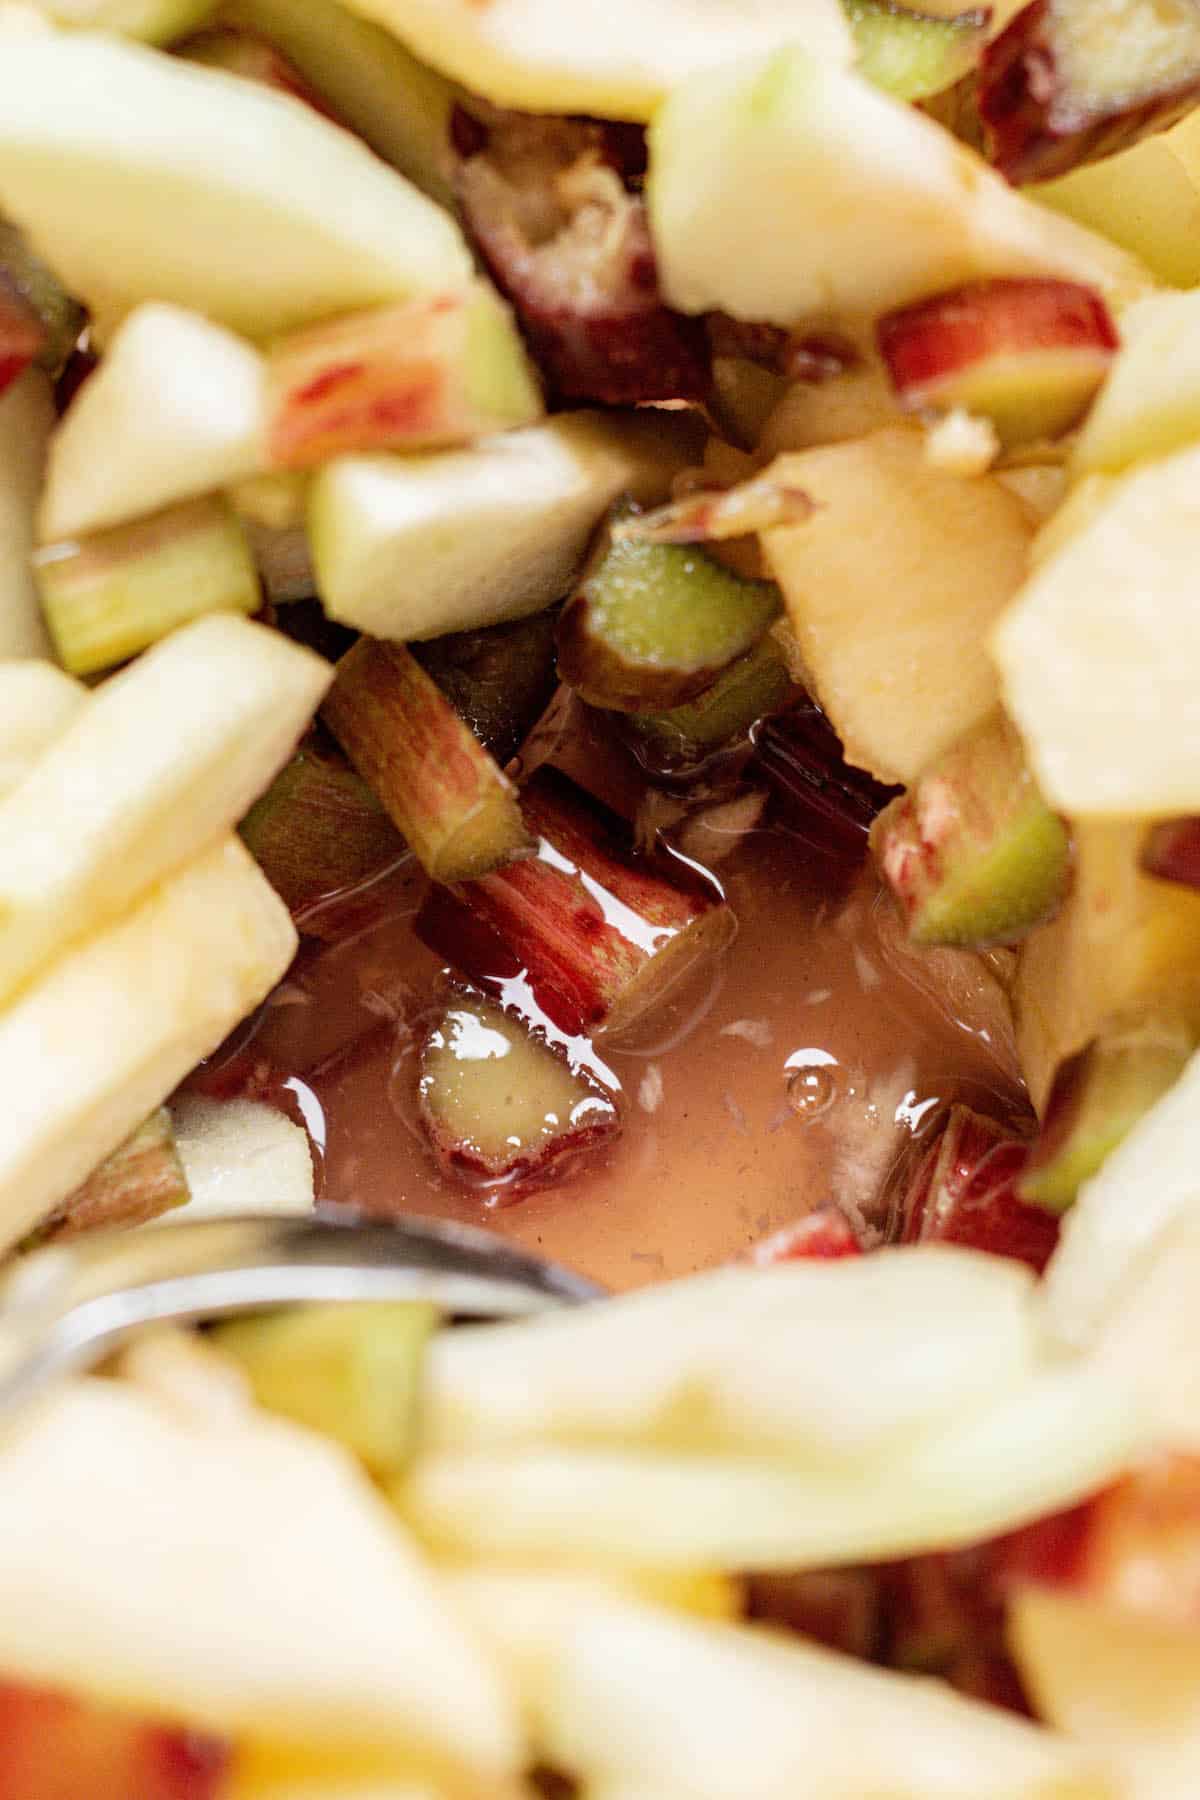 macerated apples and rhubarb.